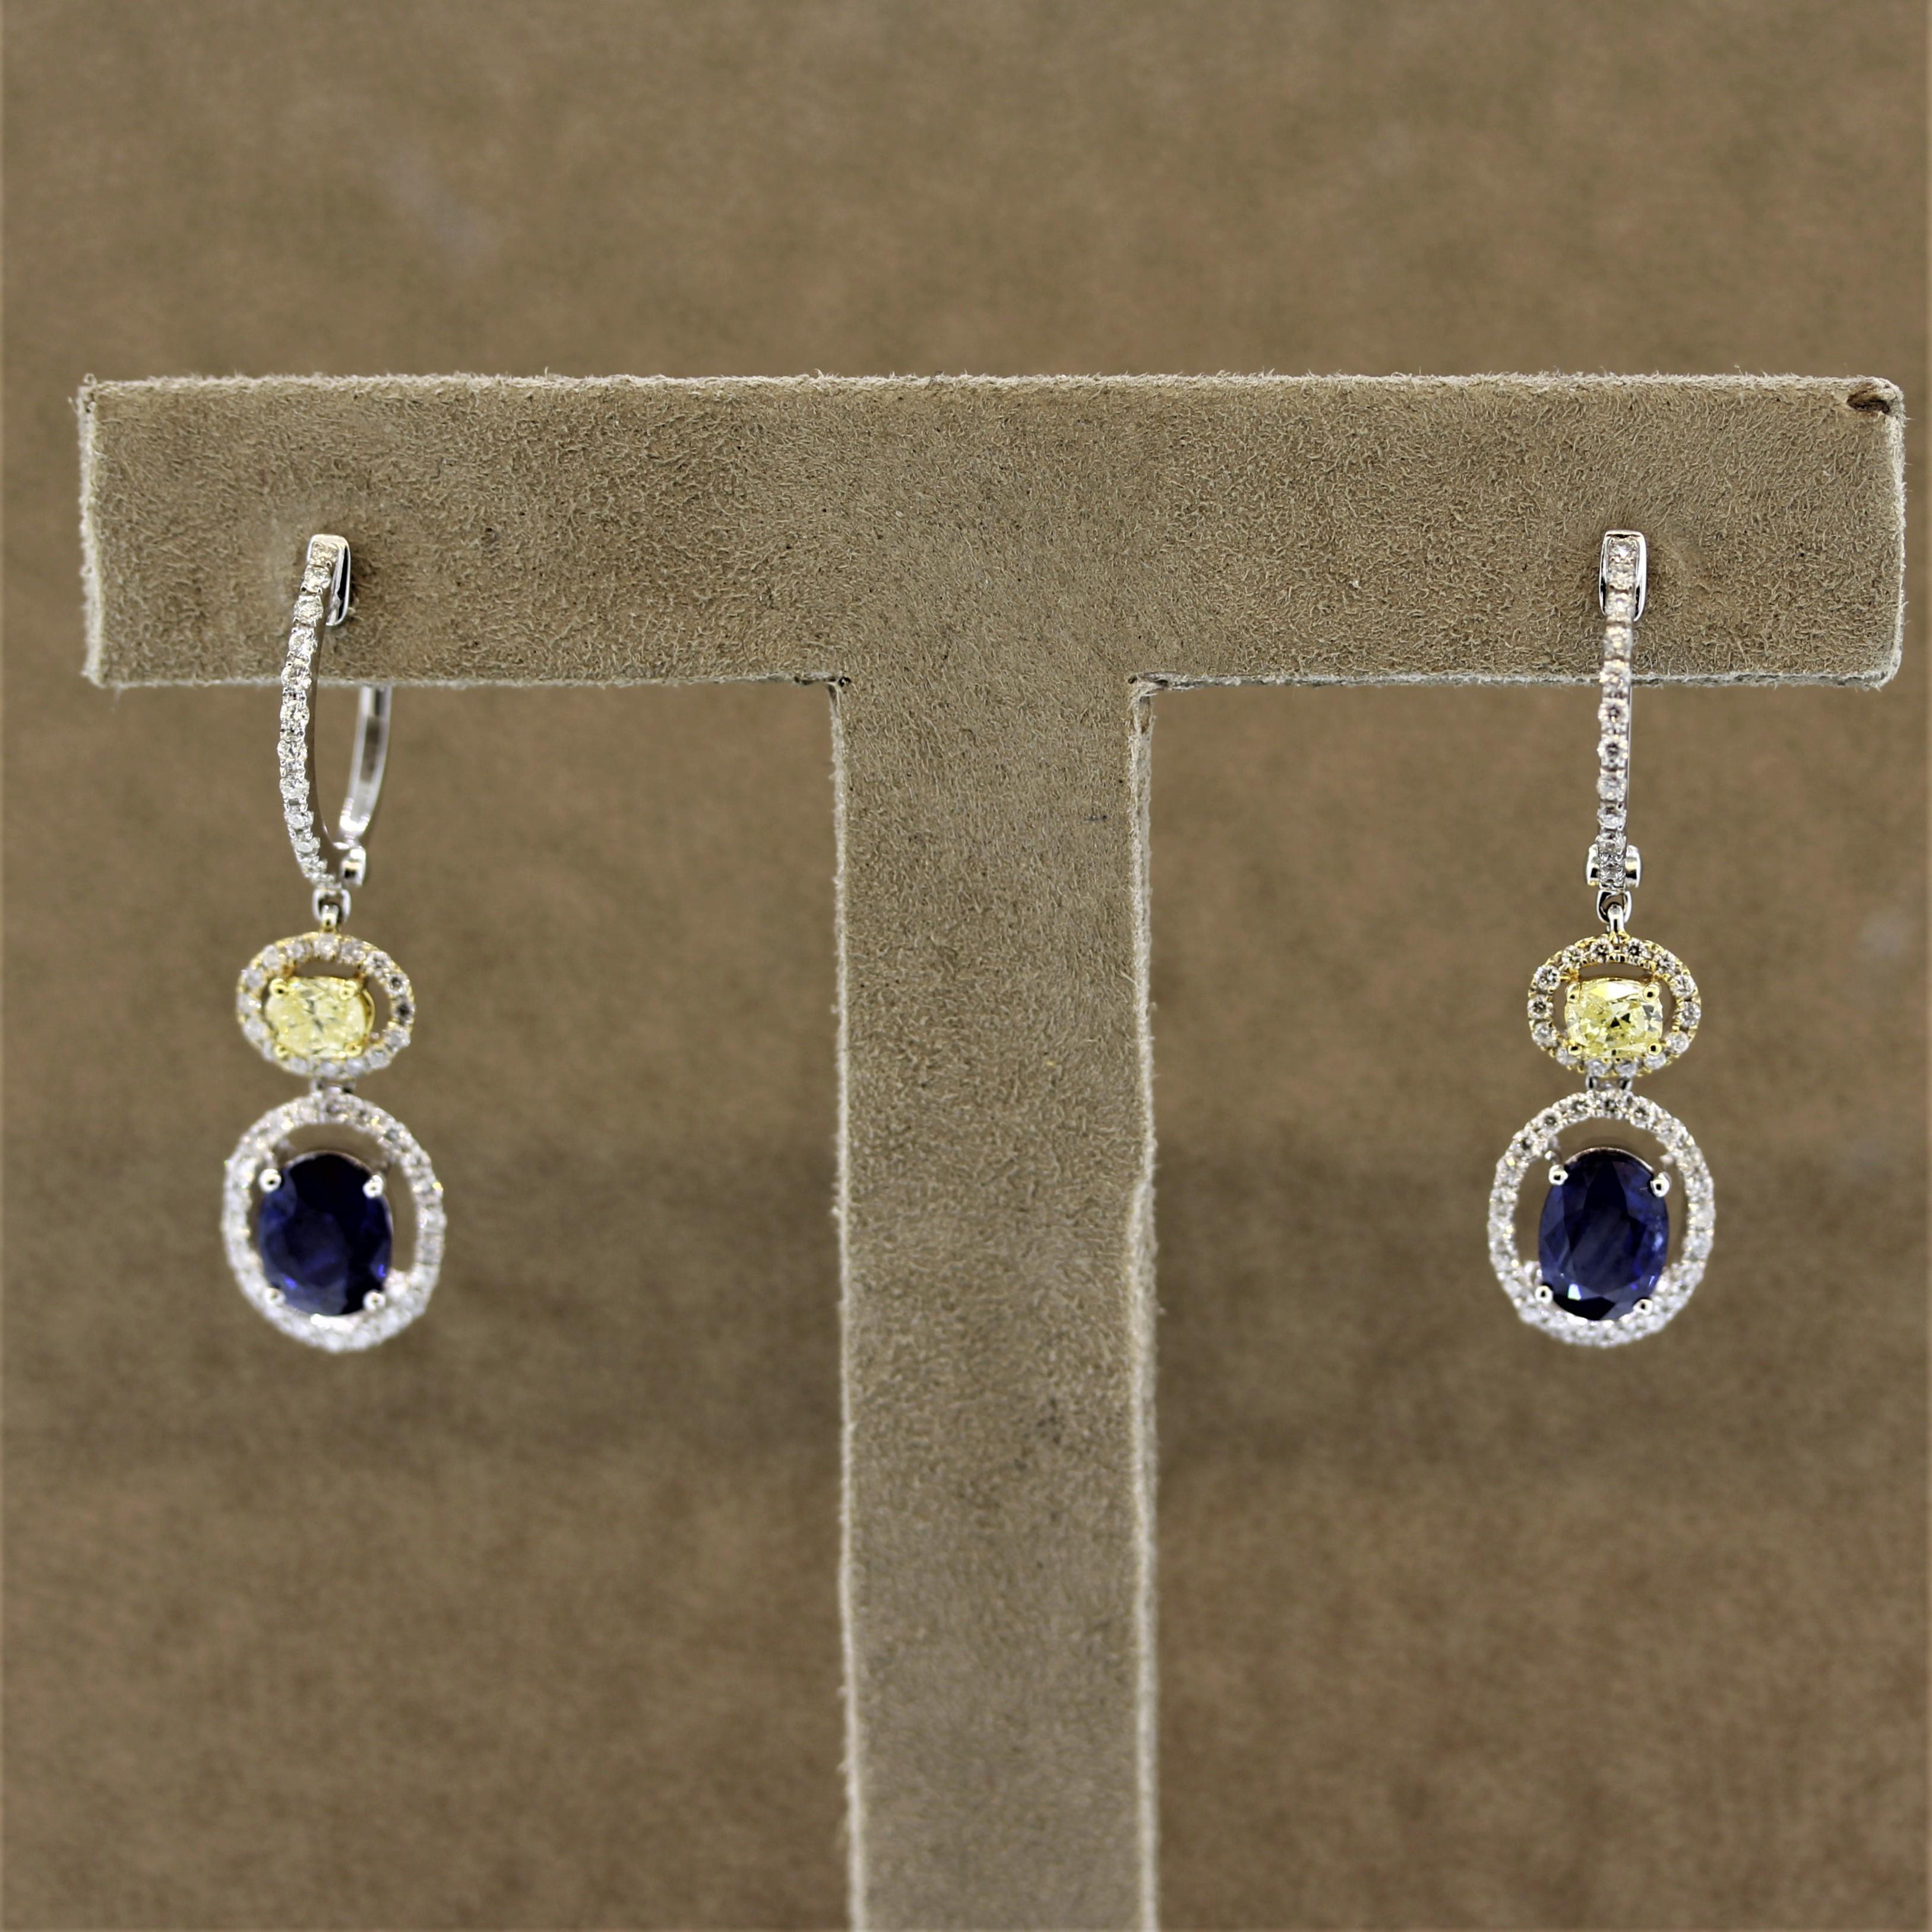 A lovely pair of drop earrings featuring fine blue sapphires and fancy colored yellow diamonds. The contrasting colors bring beauty to the piece. The blue sapphires are an oval shape and weigh a total of 2.48 carats, while the two fancy yellow